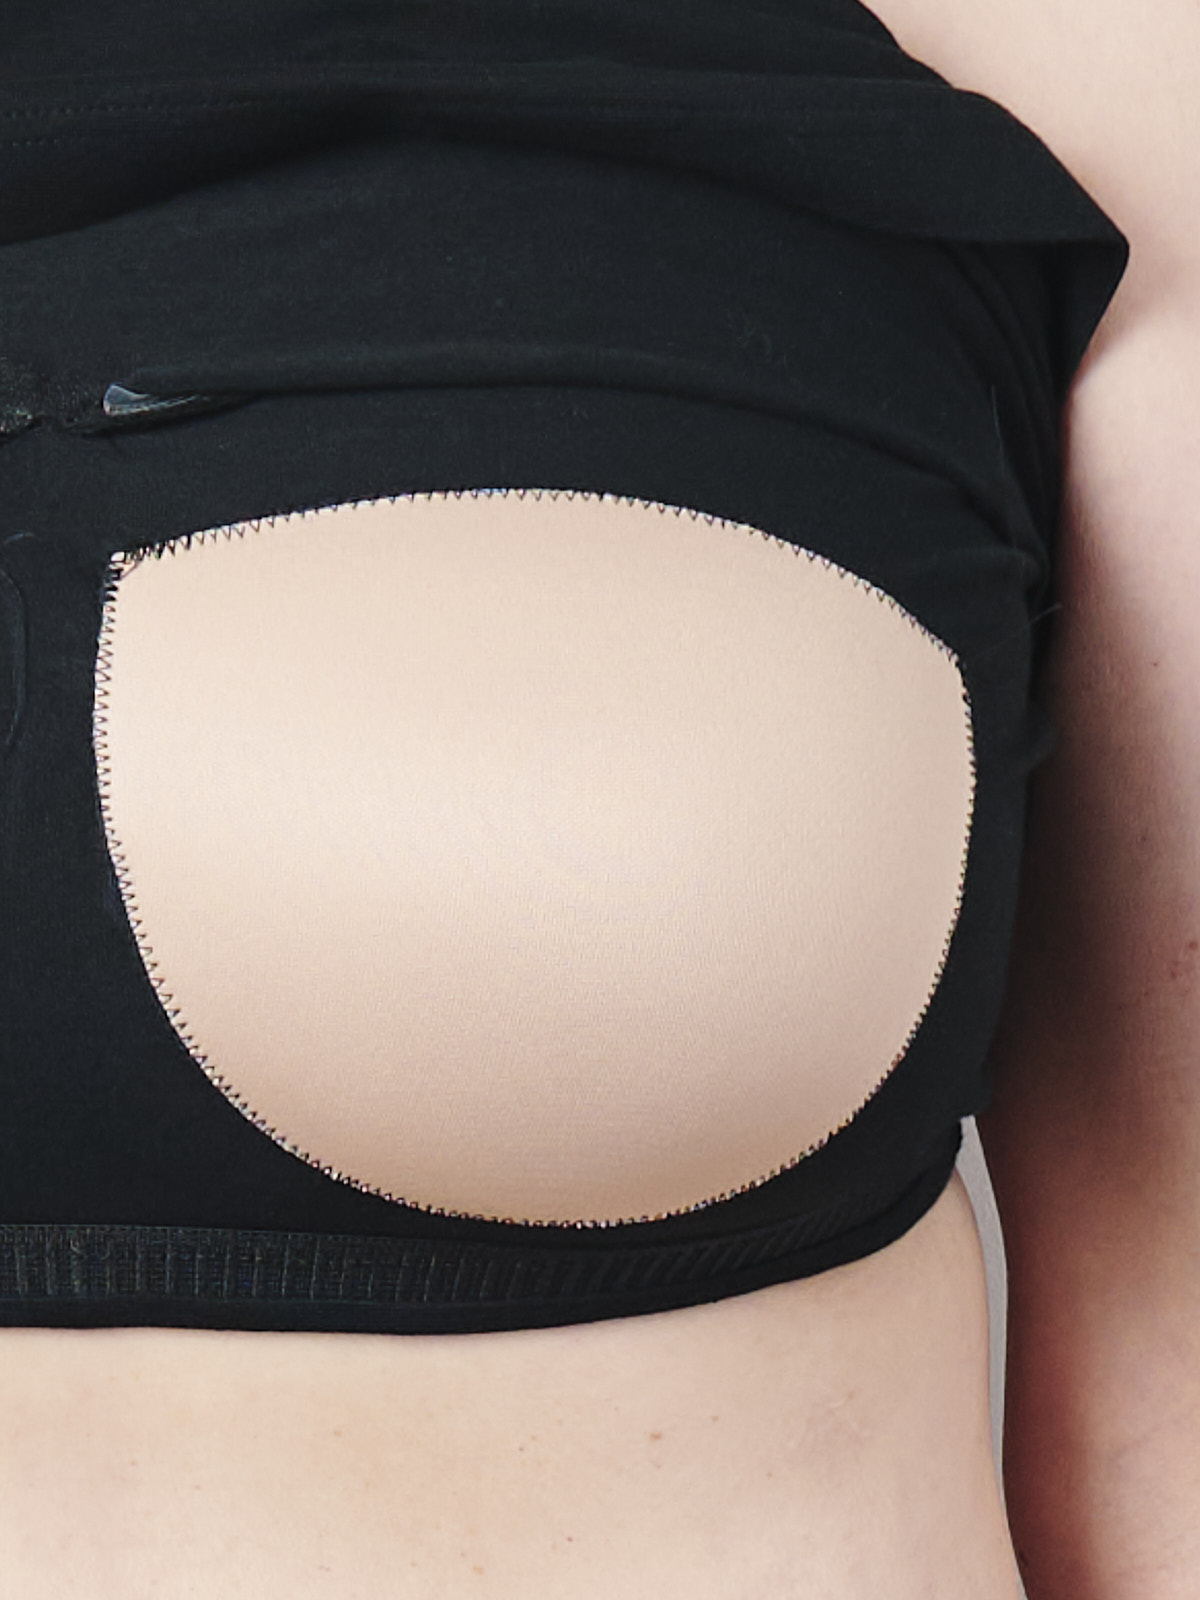 How to Add a Built-in-Bra 